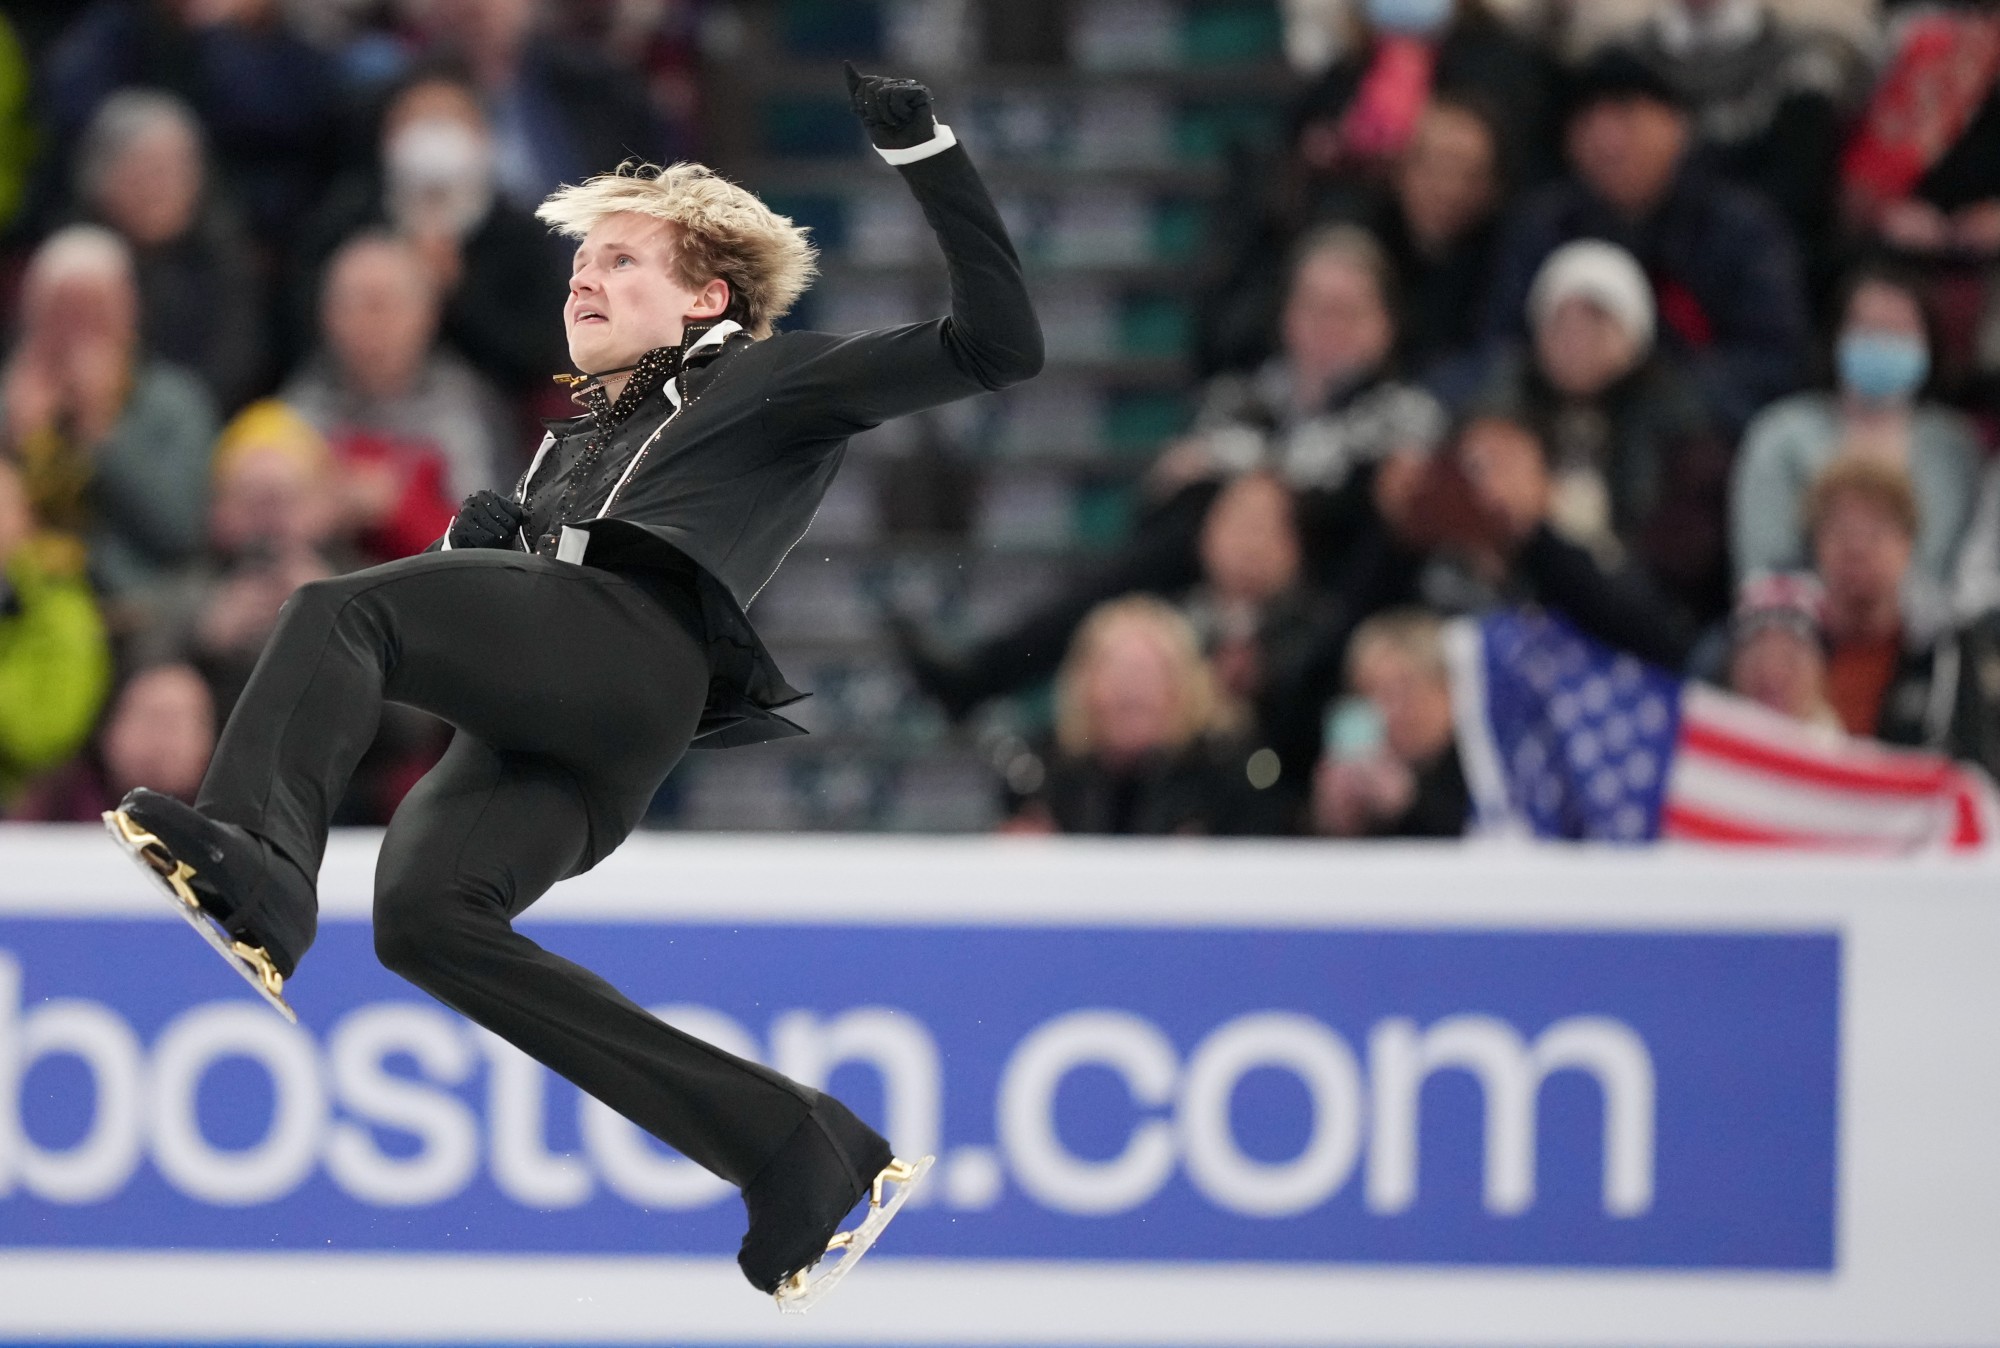 Watch an American Figure Skater Win the World Championships in a Captivating Performance – Reported by Mother Jones